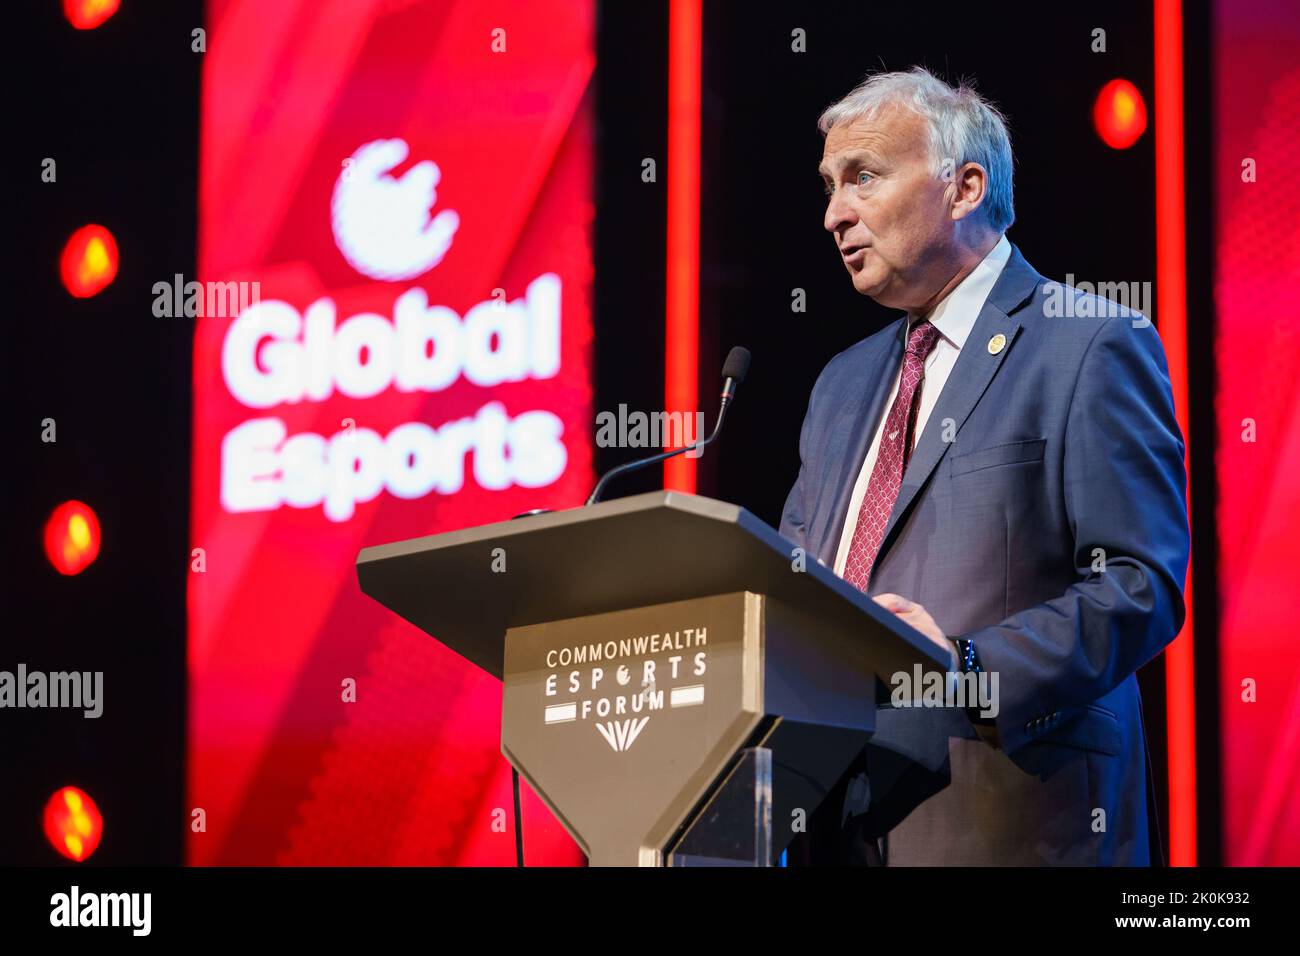 Councillor Ian Ward, Birmingham City Council gives a speech at The Forum during the Commonwealth Esports Championships at the Birmingham ICC, UK. Cred Stock Photo